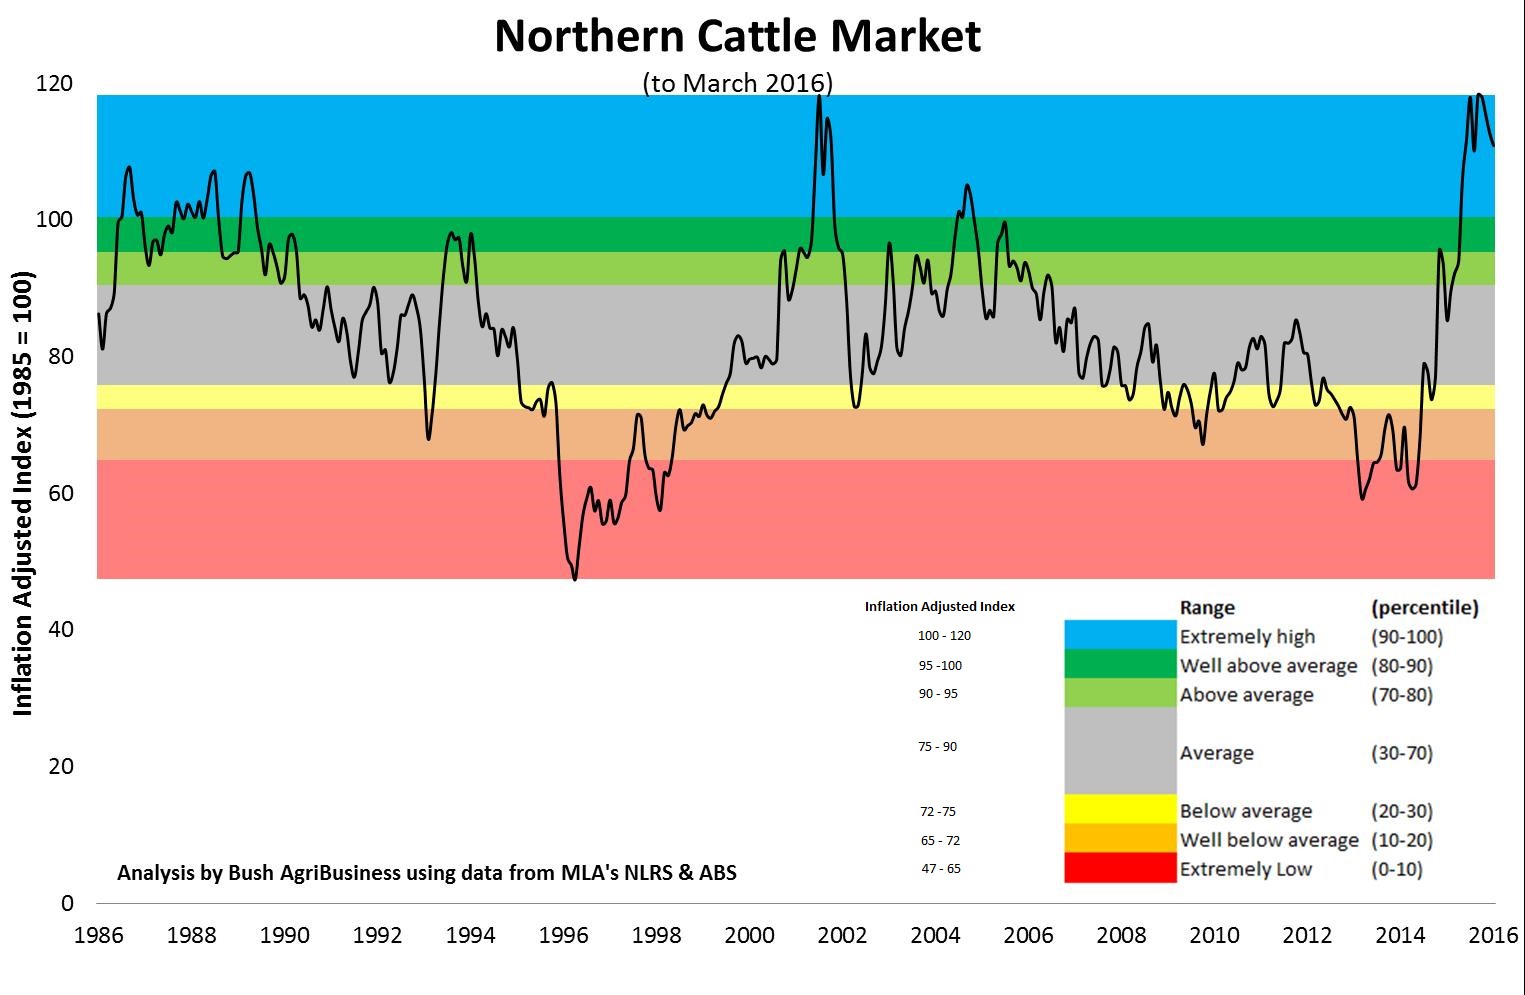 Line graph showing Northern cattle market from 1986 to March 2016.